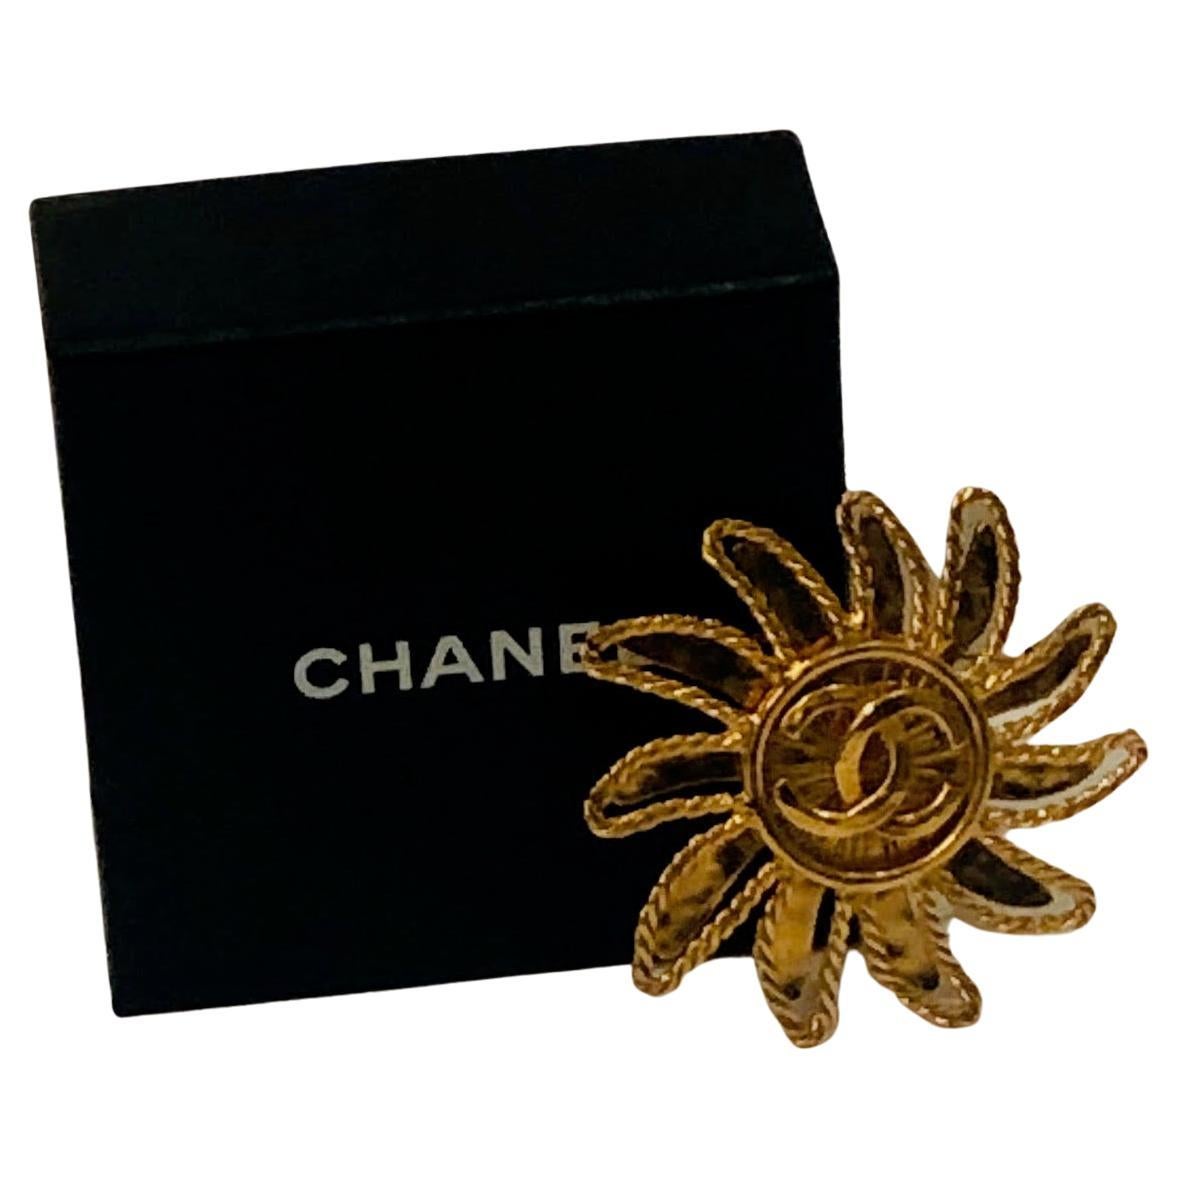 CHANEL 1994 Sun Brooch Pin Gold CC Logo W/Box
A vintage rare CHANEL large CC logo sun brooch in gold tone, Autumn 1994. Bar pin fastening, in very good vintage condition, Chanel signature is engraved on the back of the brooch on an oval plate